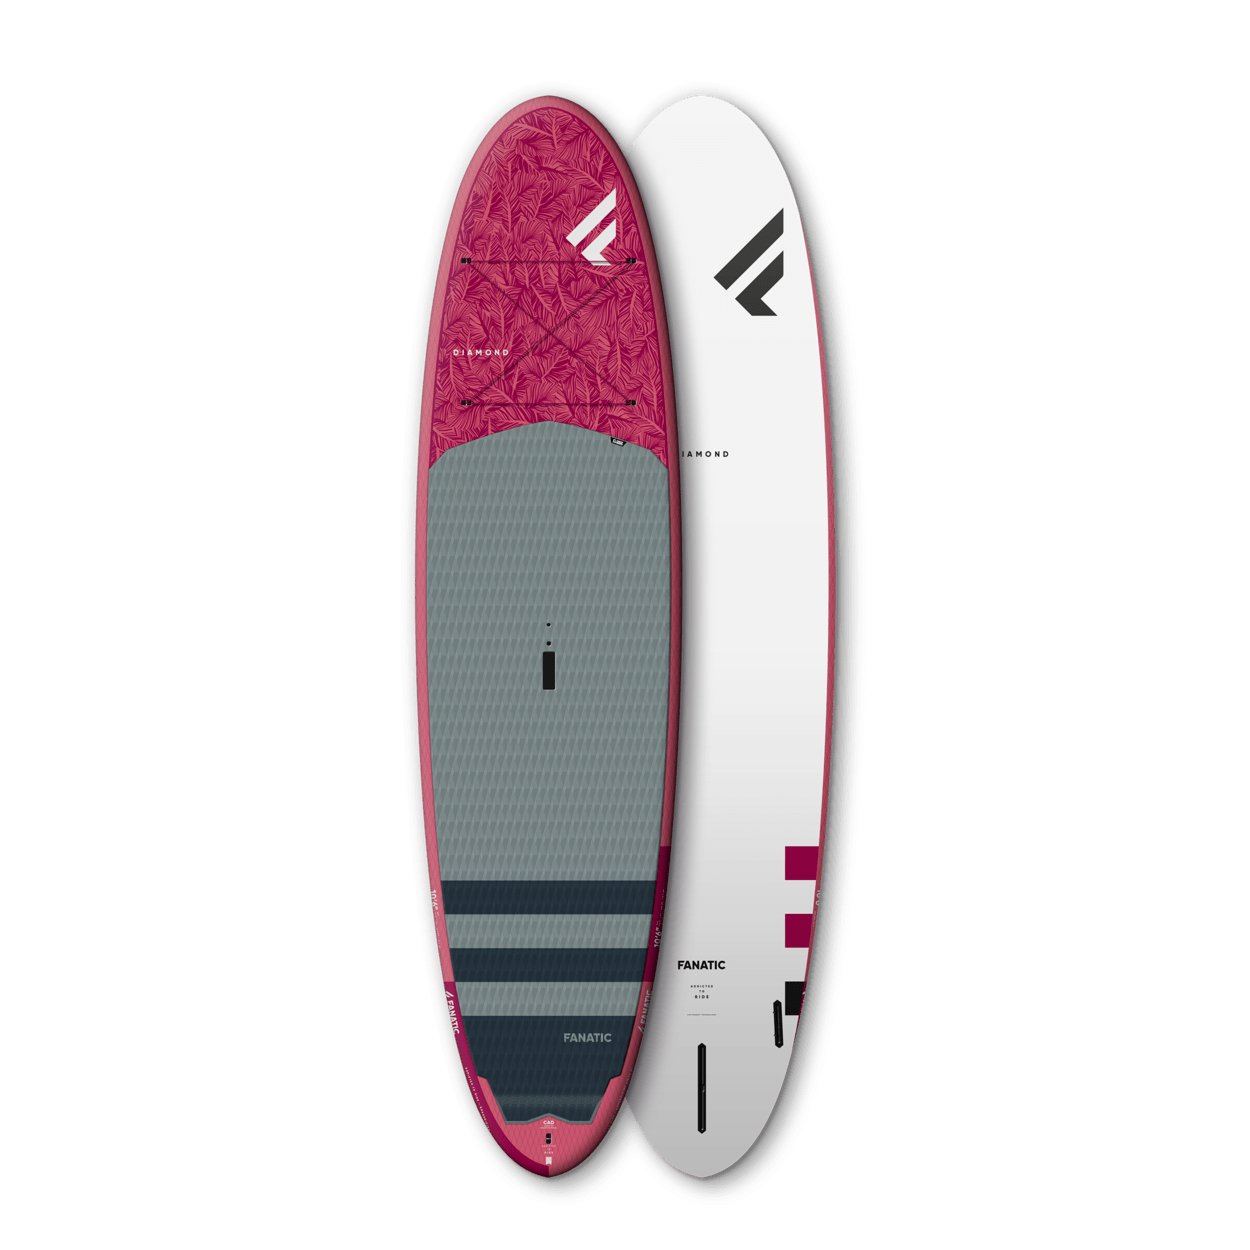 Fanatic Diamond 2022 - Worthing Watersports - 9008415919727 - SUP Composite - Fanatic SUP